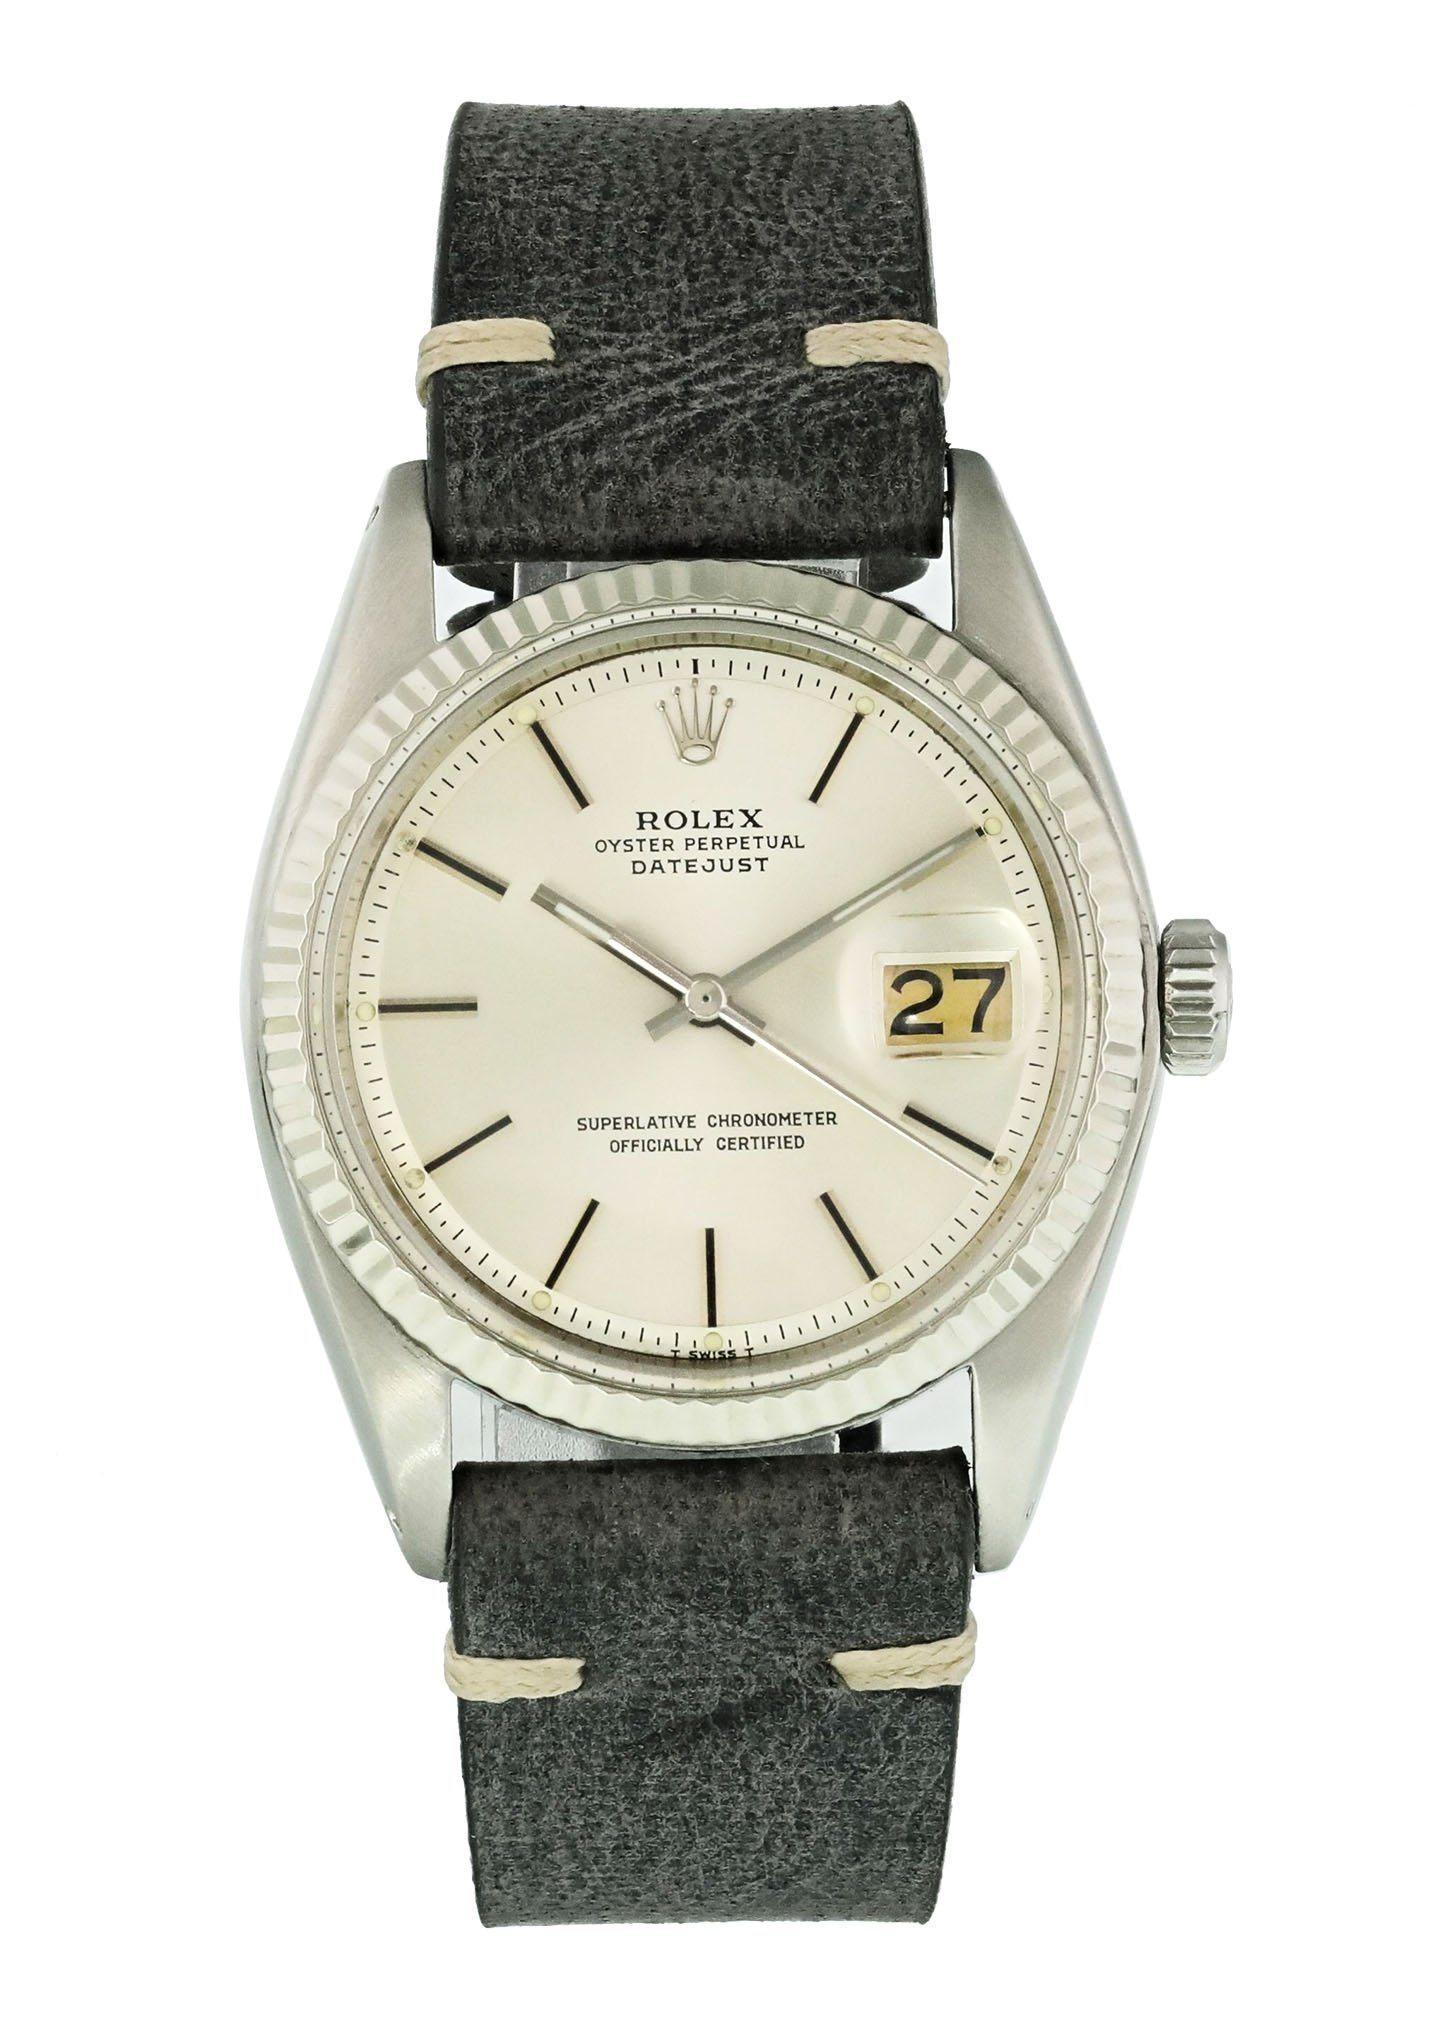 Rolex Oyster Perpetual Datejust 1601 Men's Watch. 
36mm stainless steel case with an 18K white gold fluted bezel. 
Silver dial with steel hands and index hour markers. 
Minute markers around the outer dial. 
Date display at the 3 o'clock position.